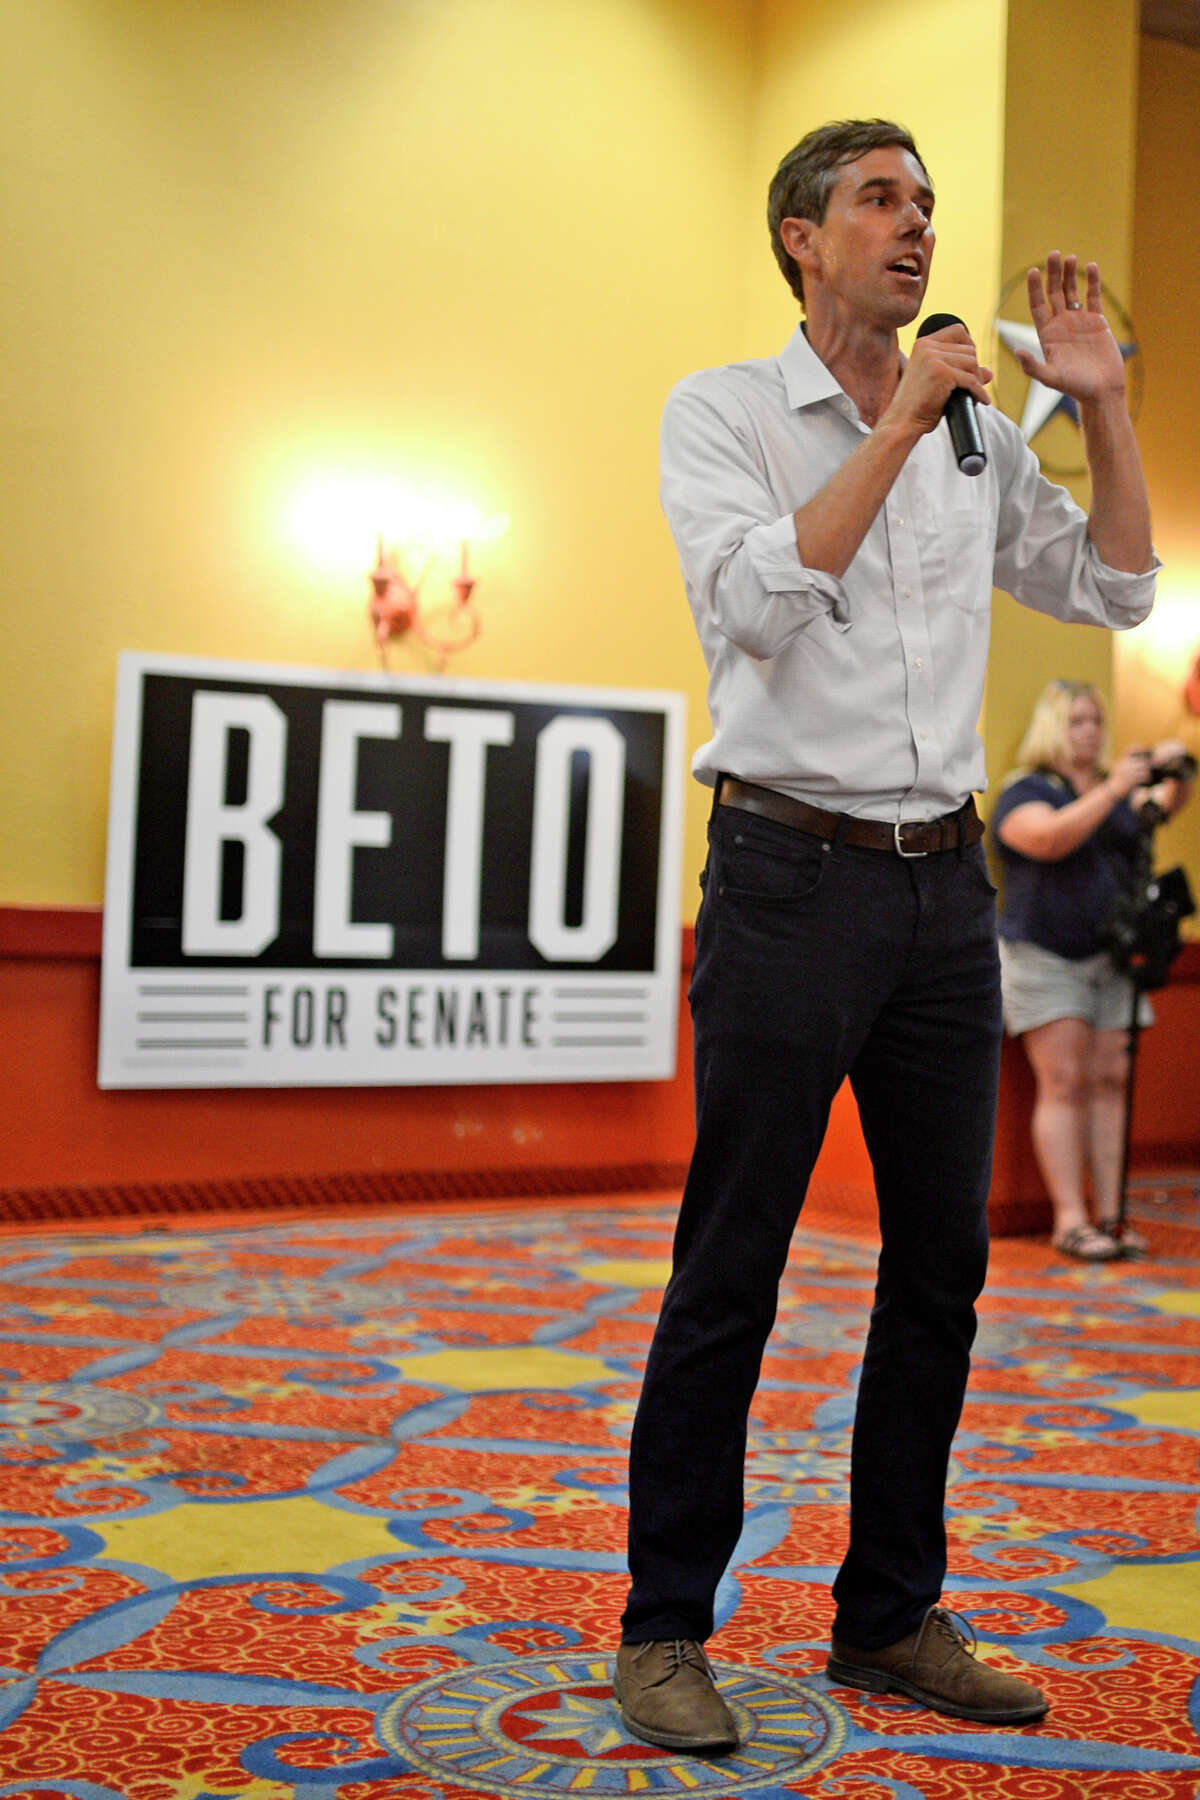 U.S. Rep. Beto O'Rourke speaks at a town hall event Aug. 30, 2018, at the Grand Texan Hotel Convention Center in Midland, Texas. James Durbin/Reporter-Telegram